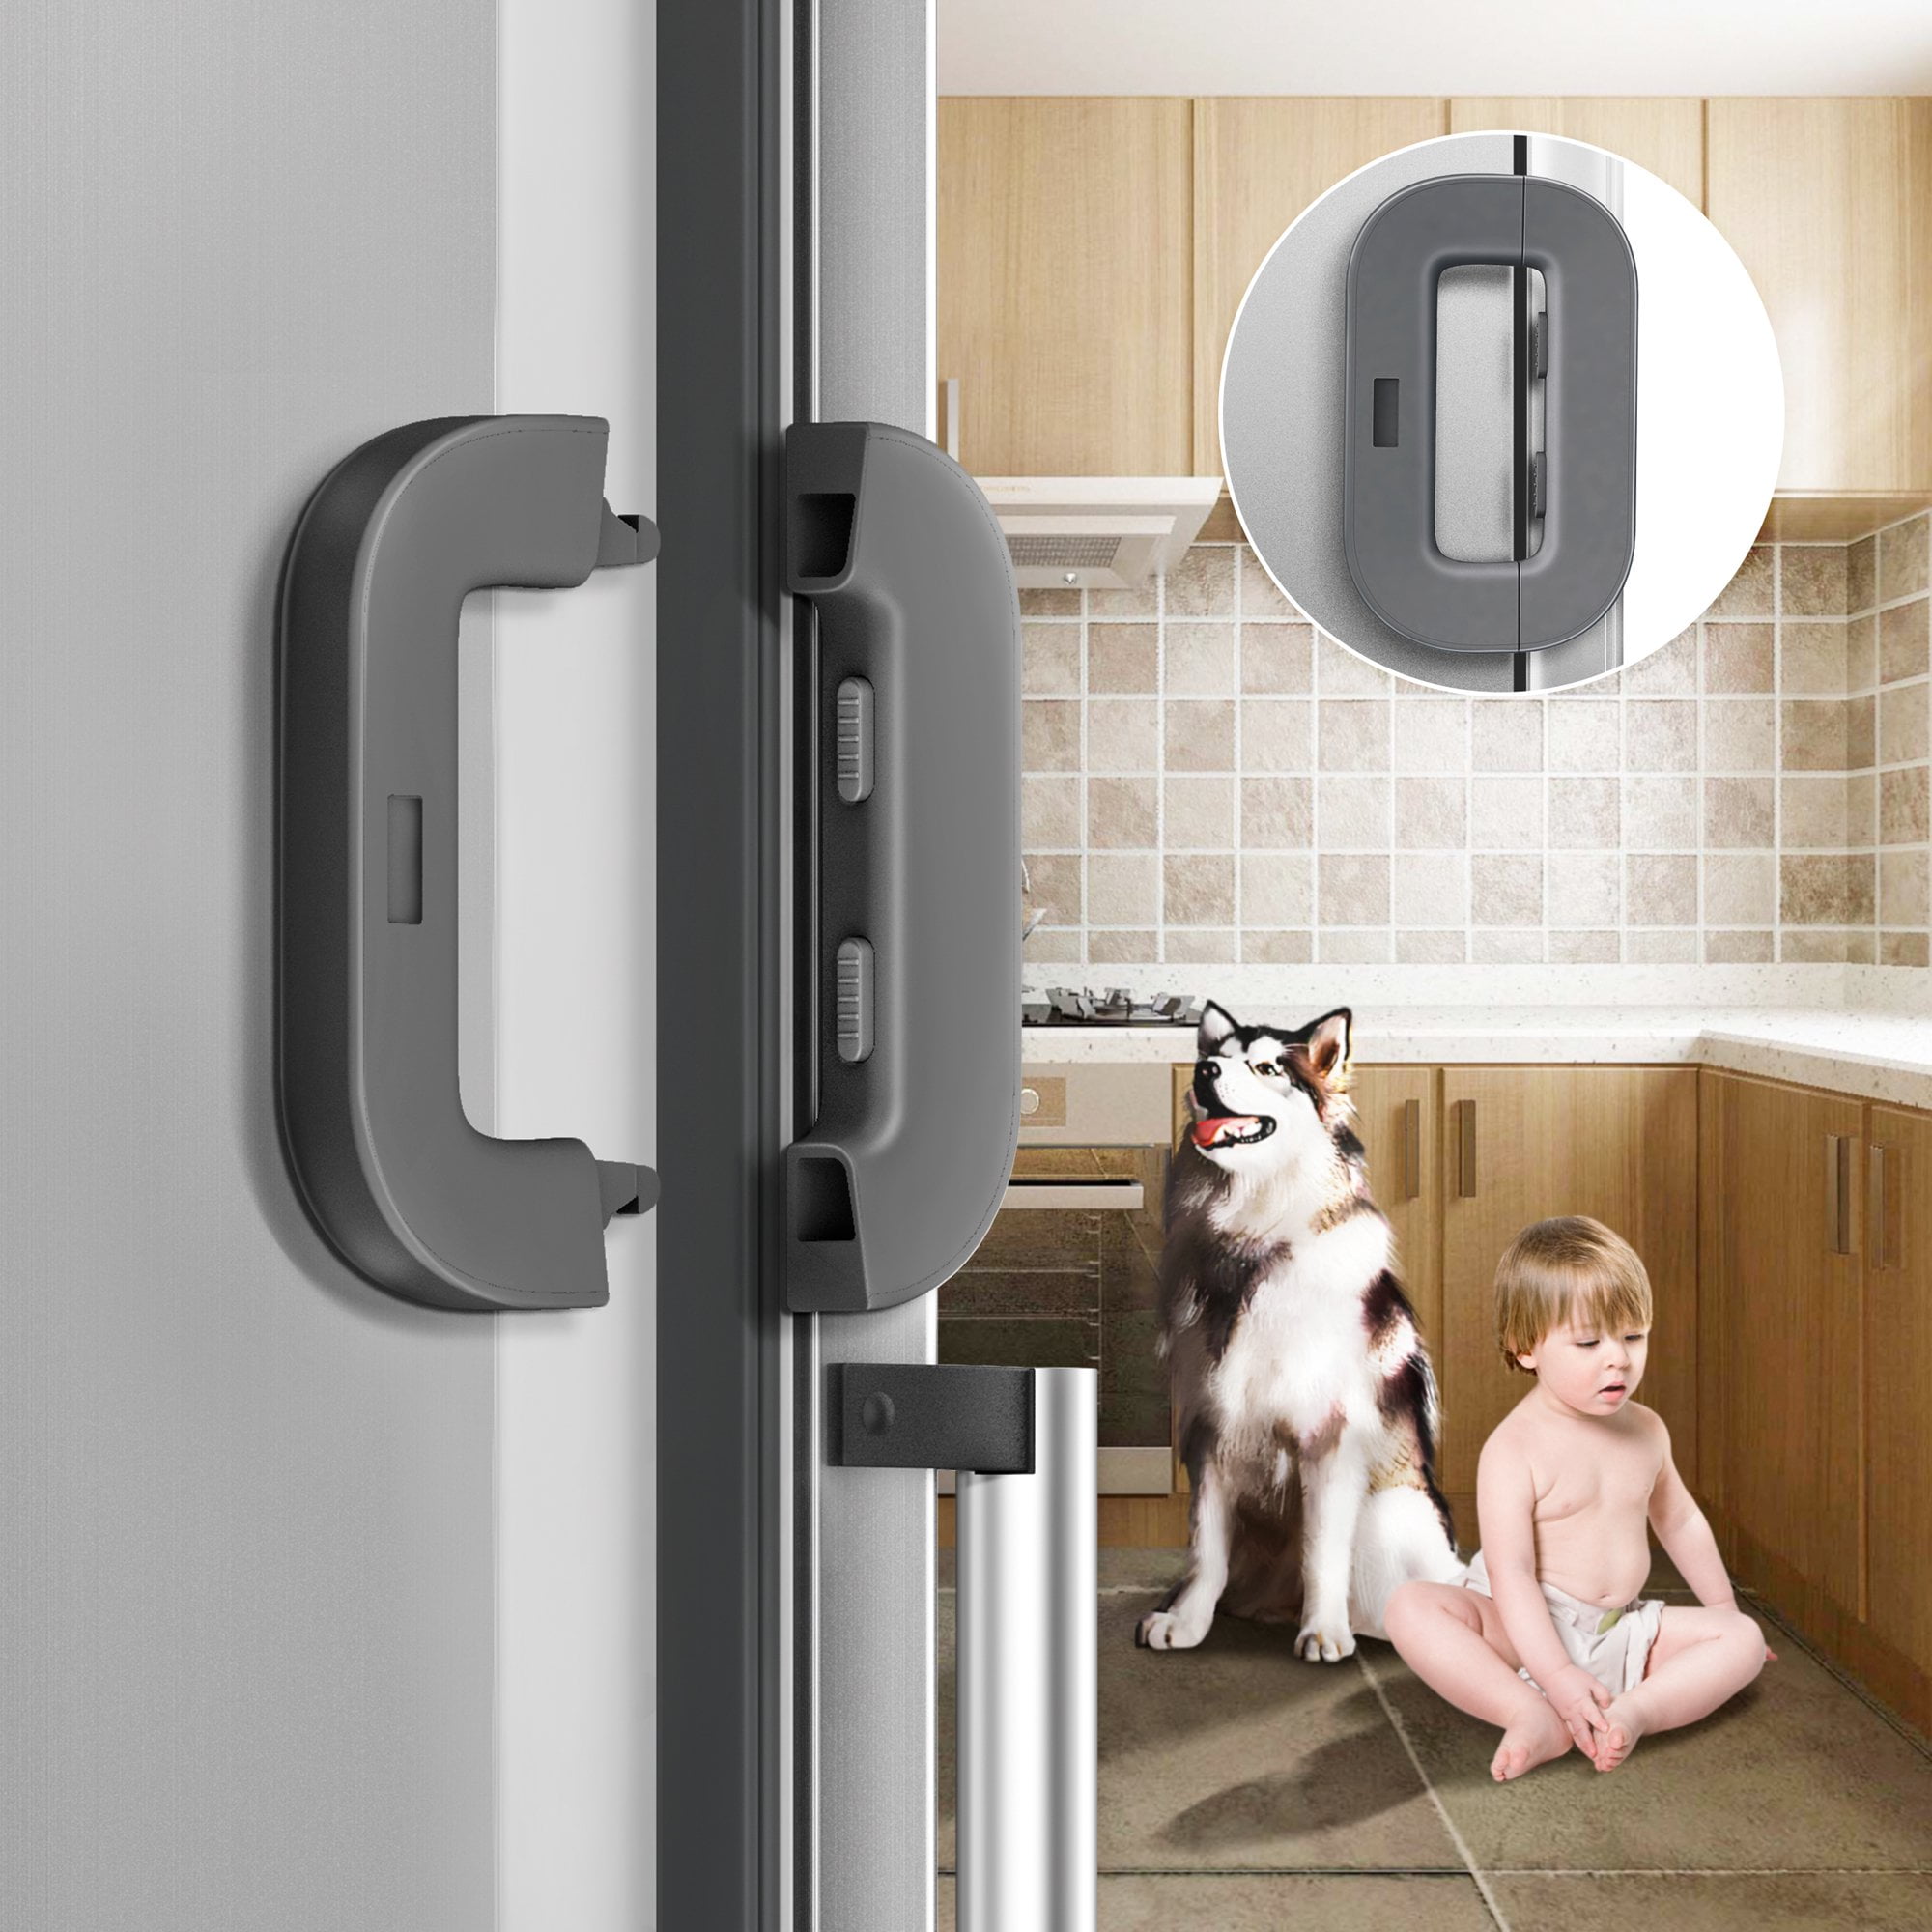 Aokur Baby Safety lock for Refrigerator Door, Cabinet with Strong